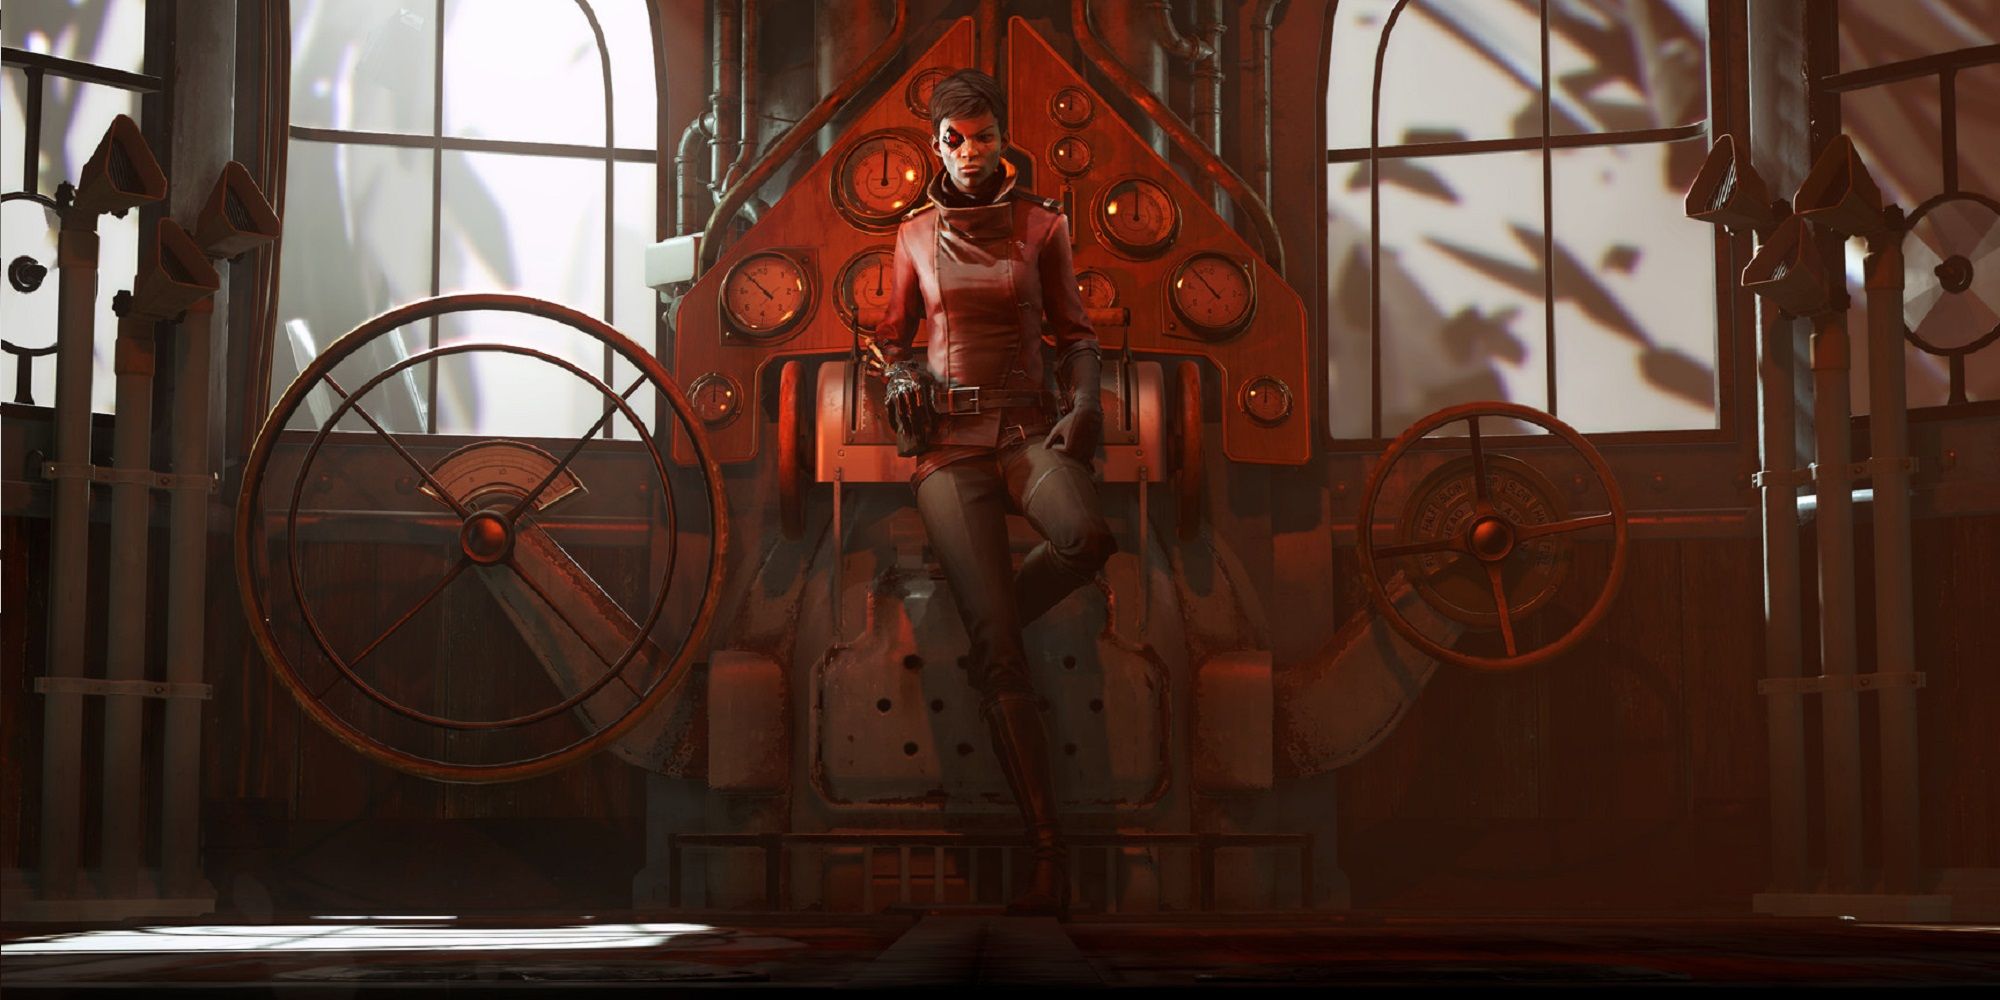 Dishonored Death Of The Outsider